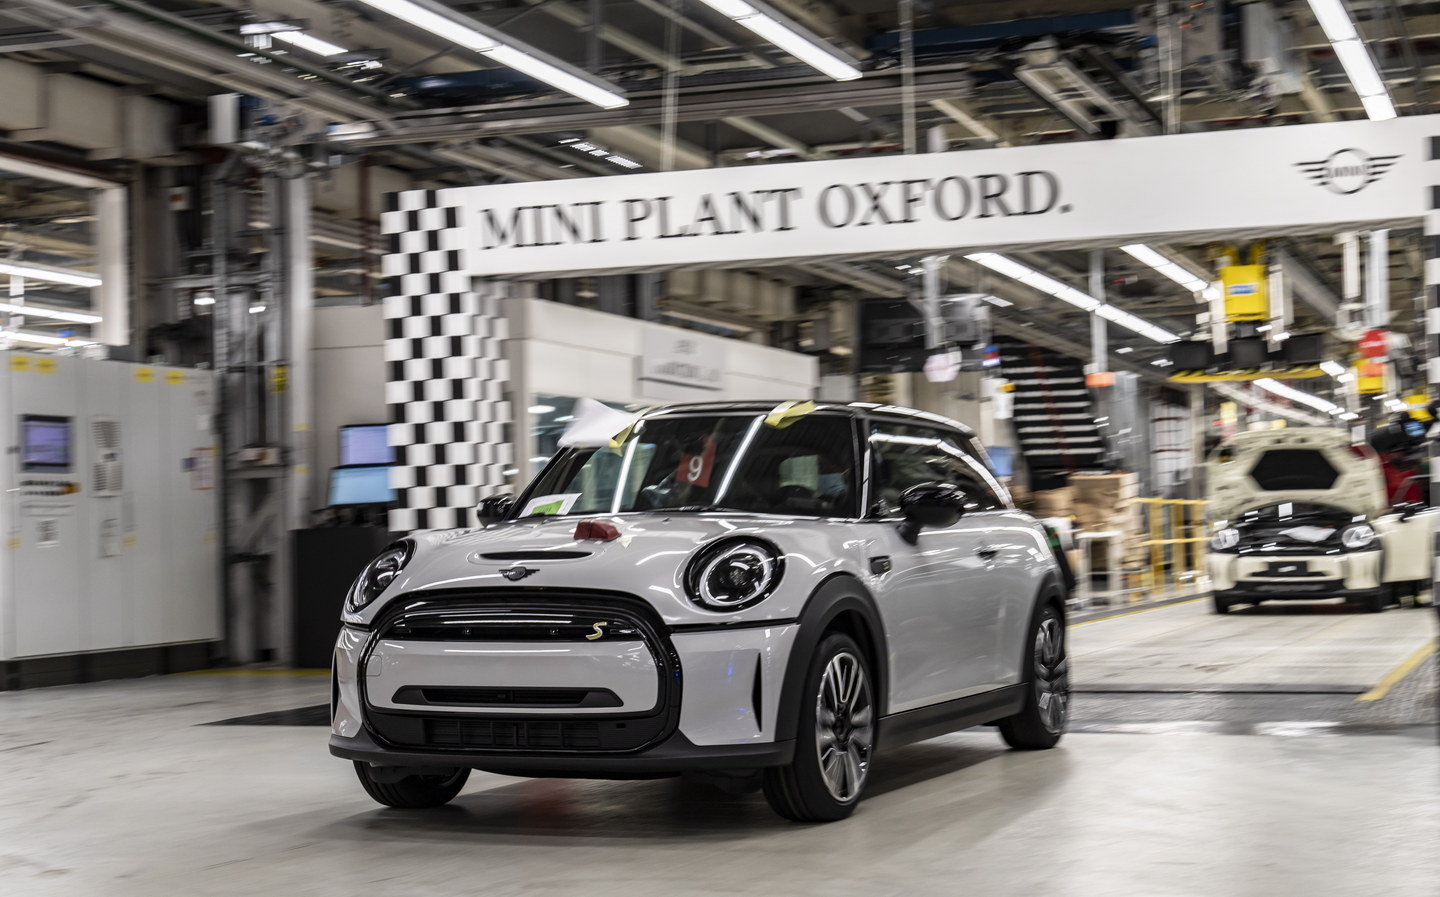 Electric Mini production could continue in Oxford after £500m investment and £75m taxpayer contribution